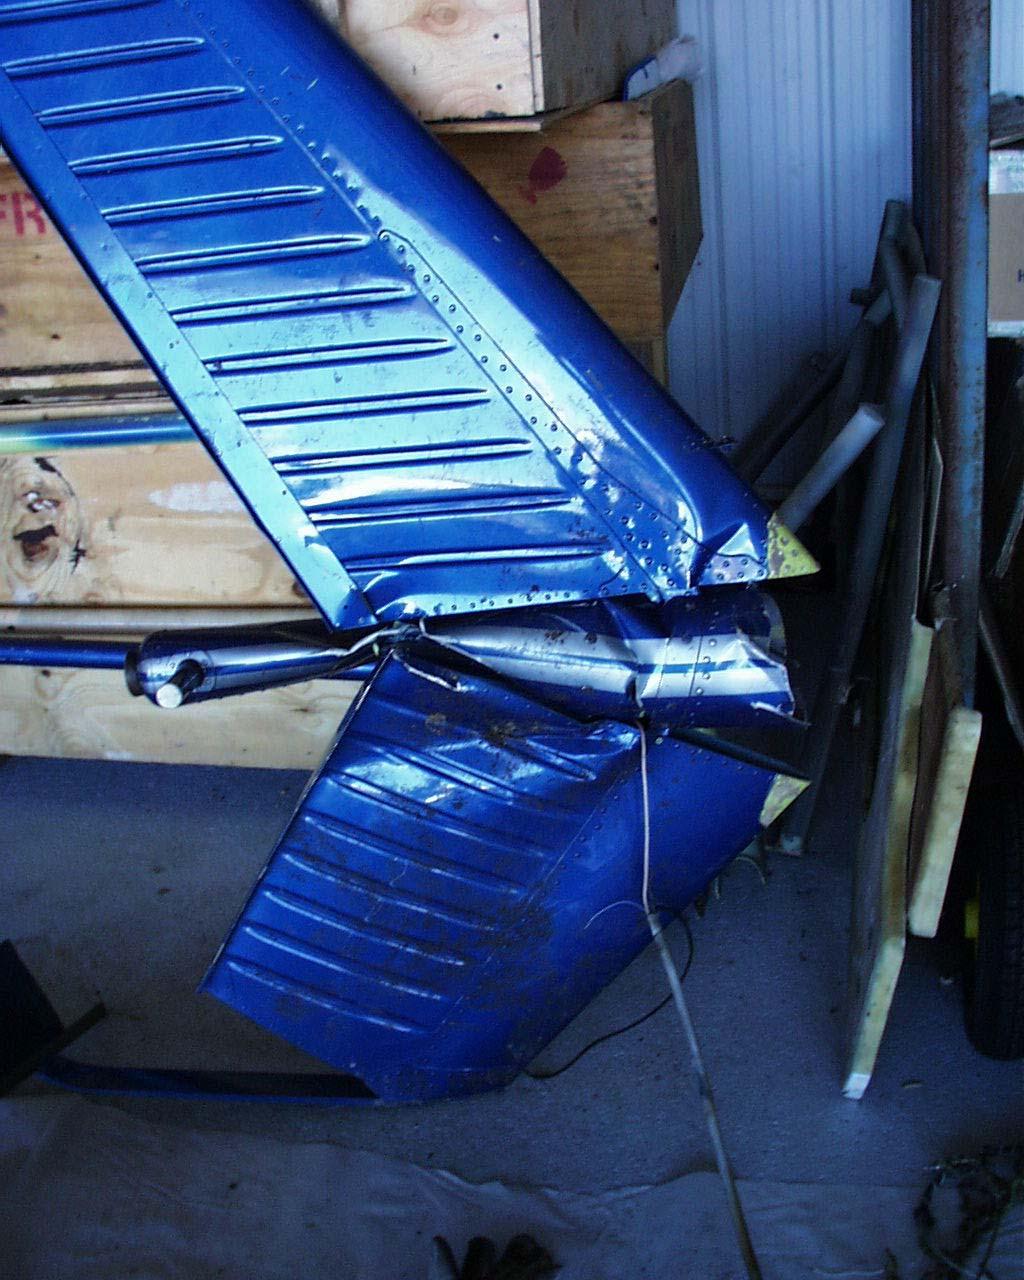 The vertical fin assembly and tail cone were detached from the tailboom.